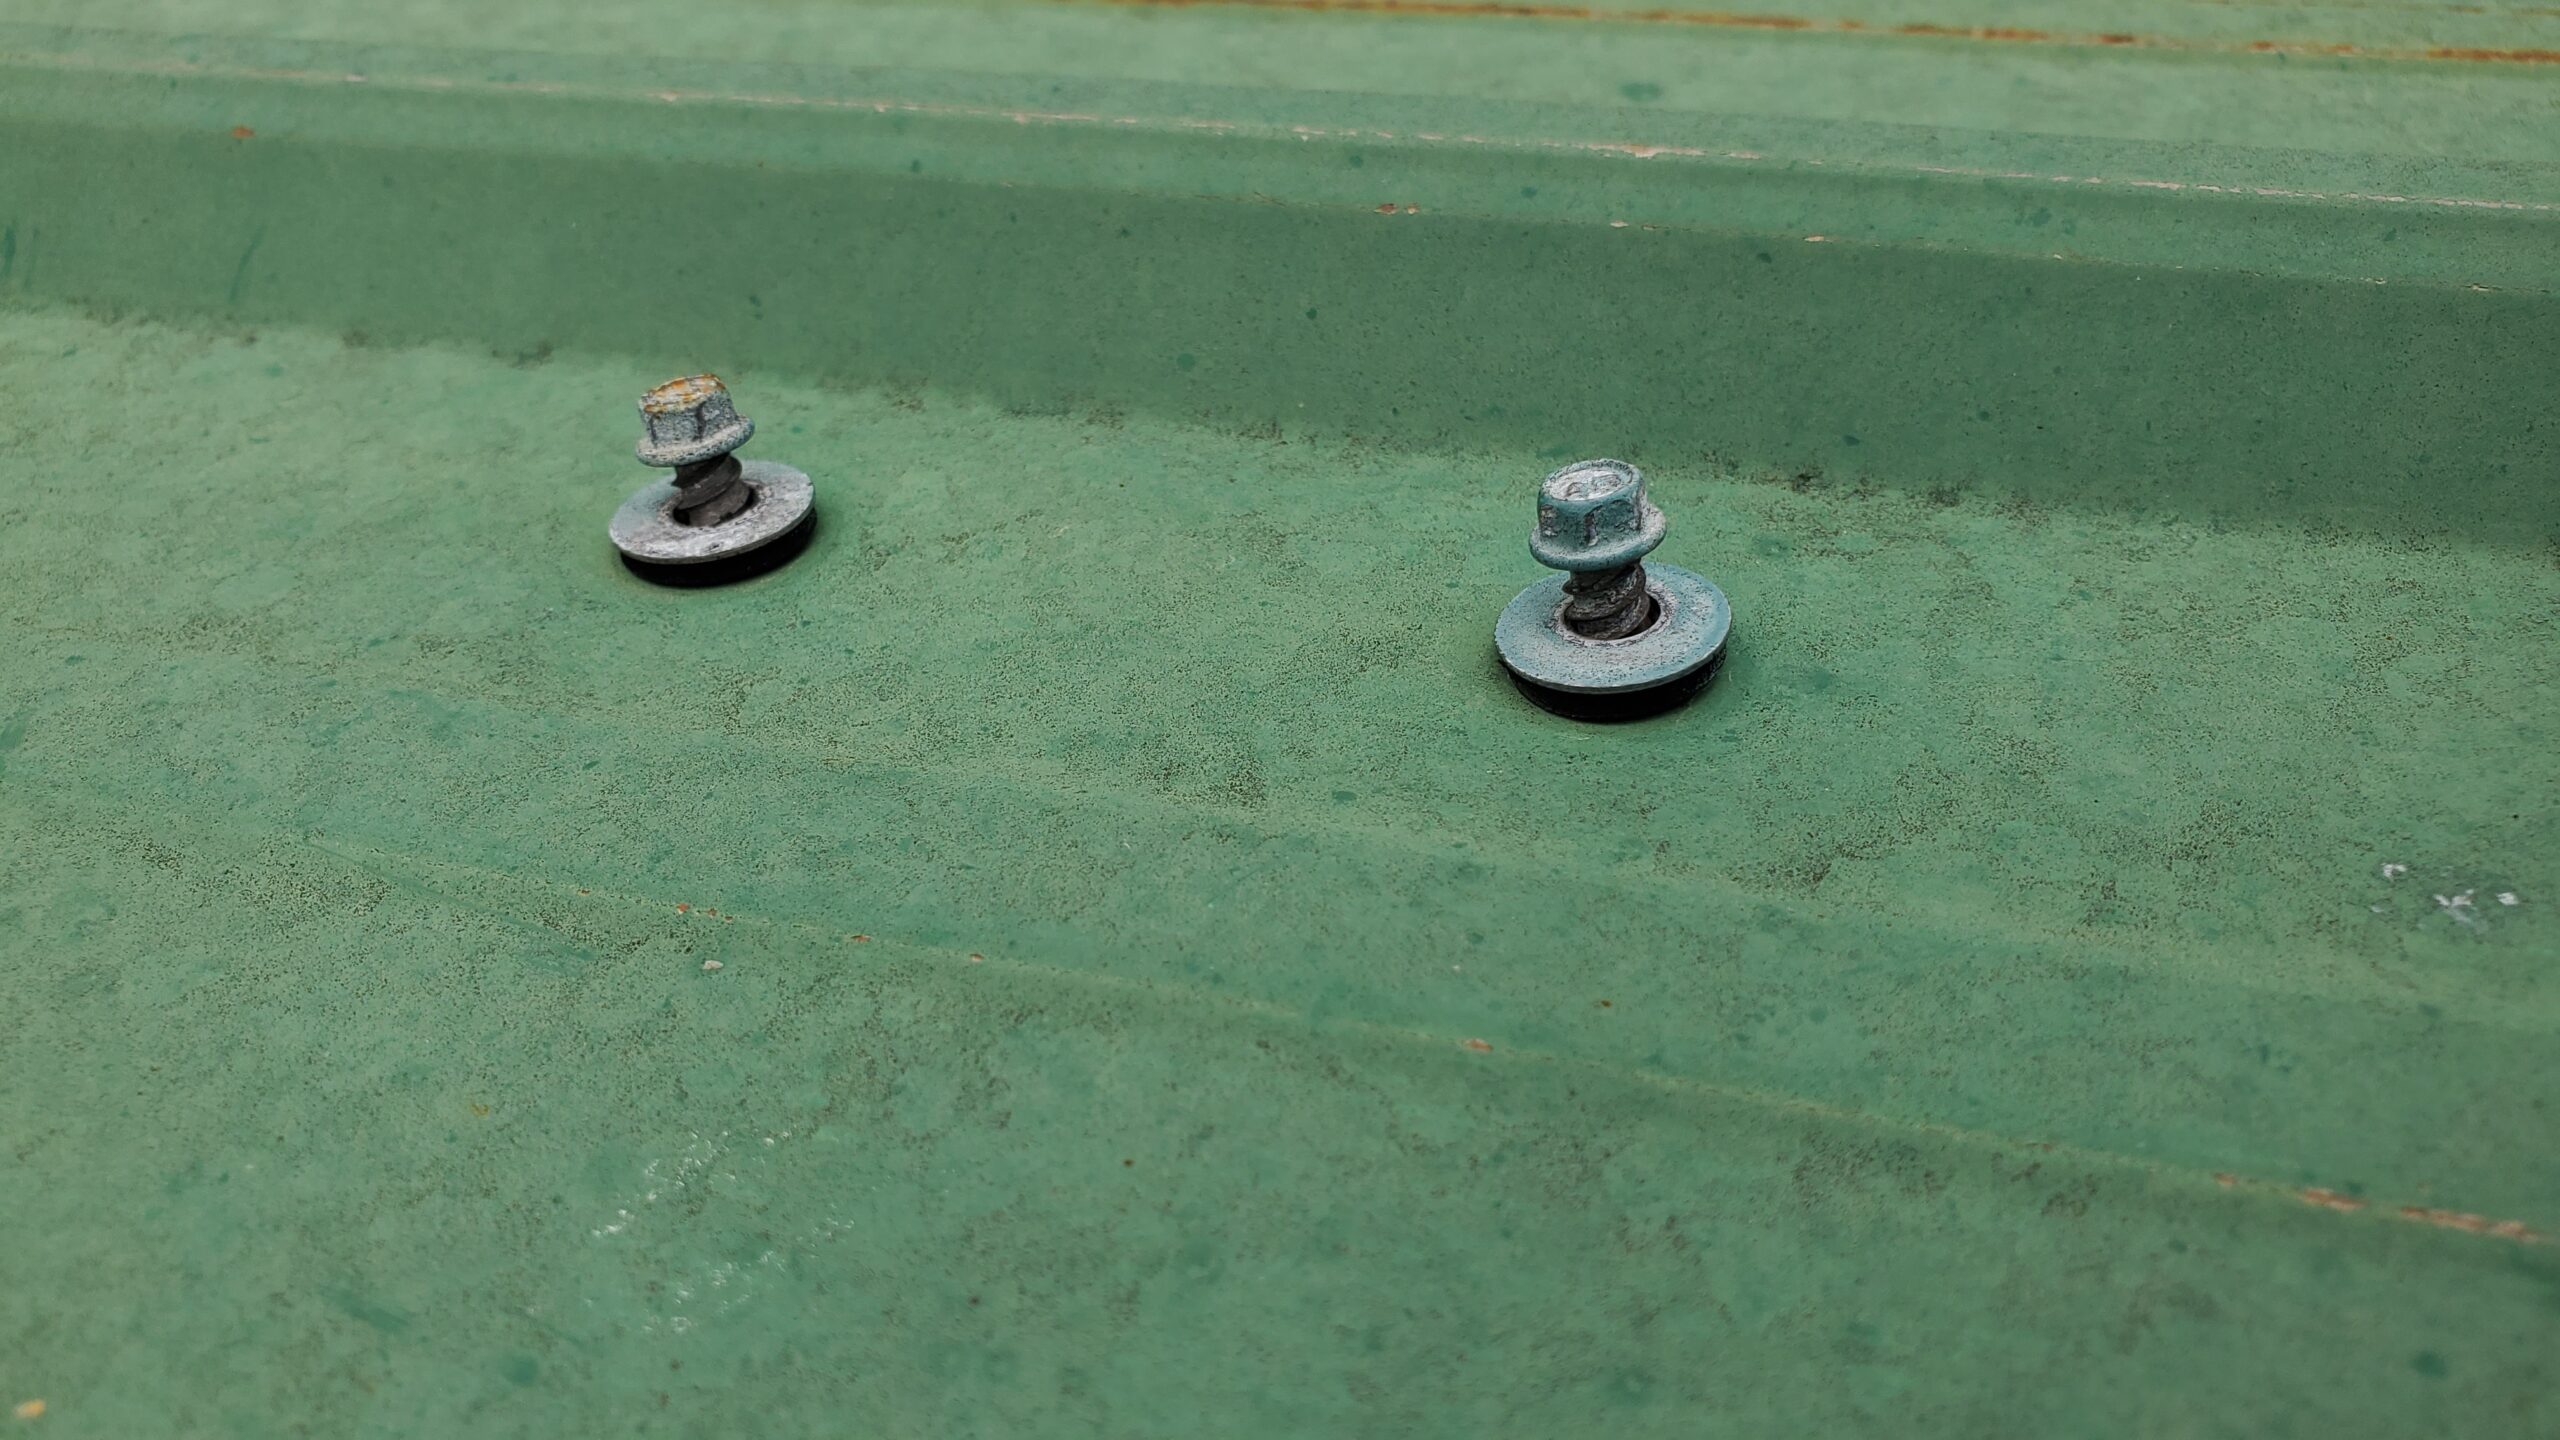 This is a picture of screws on a green metal panel.